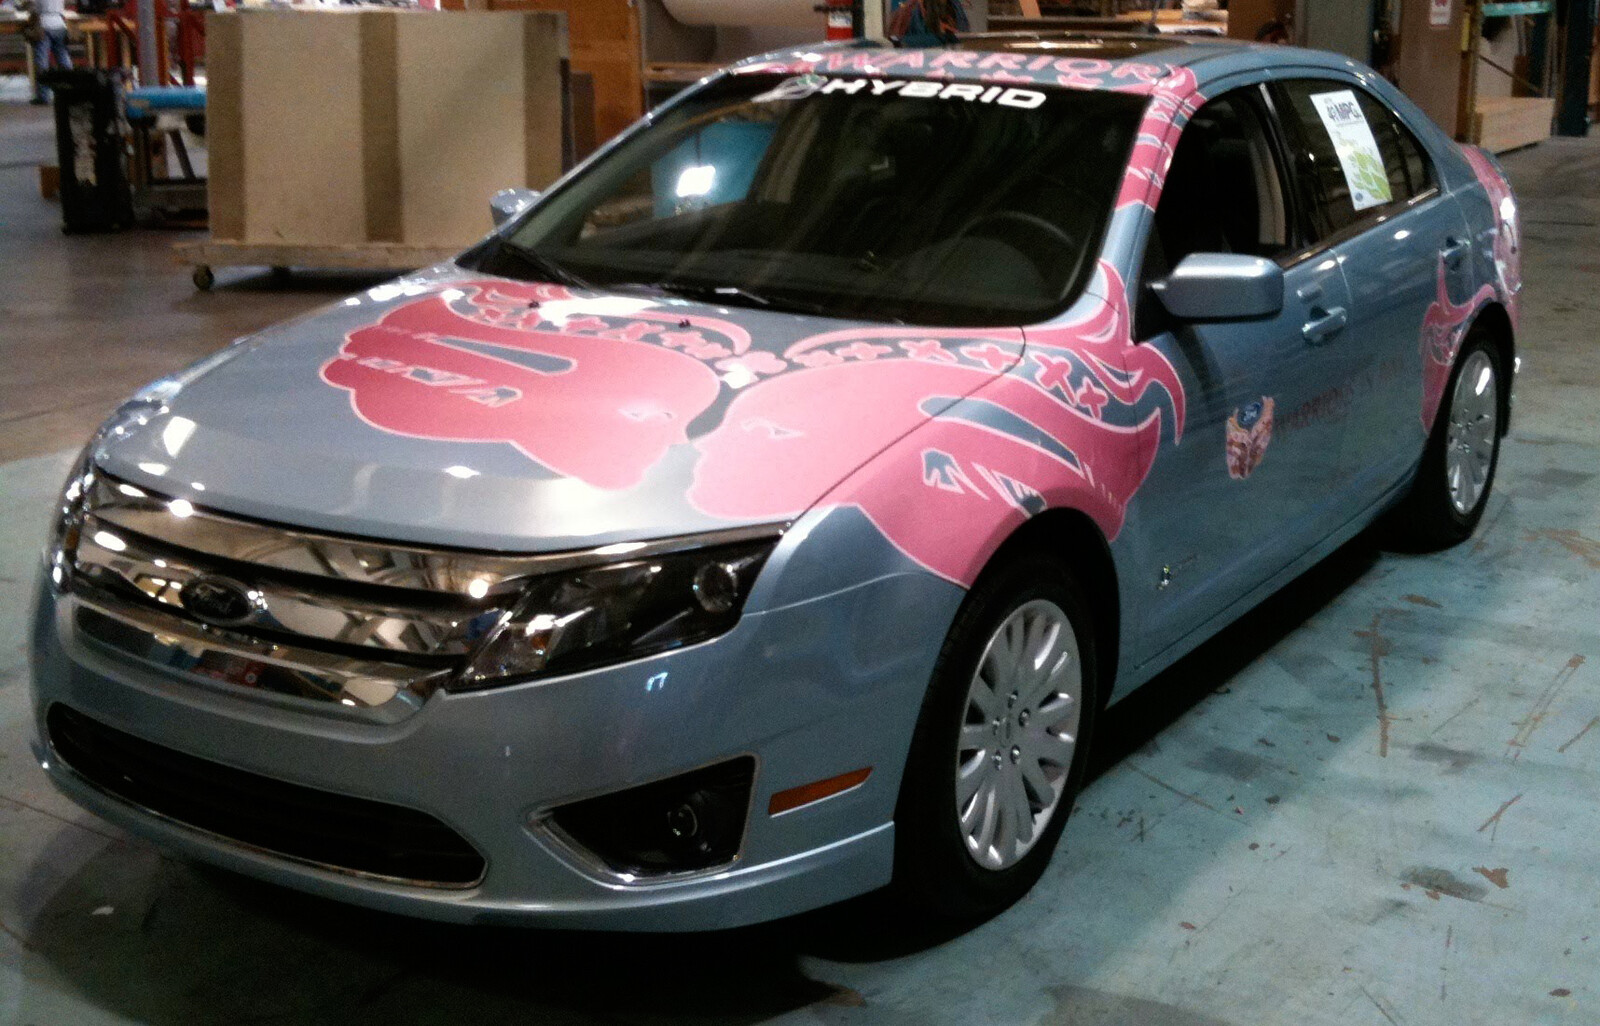 Warriors In Pink Show Car